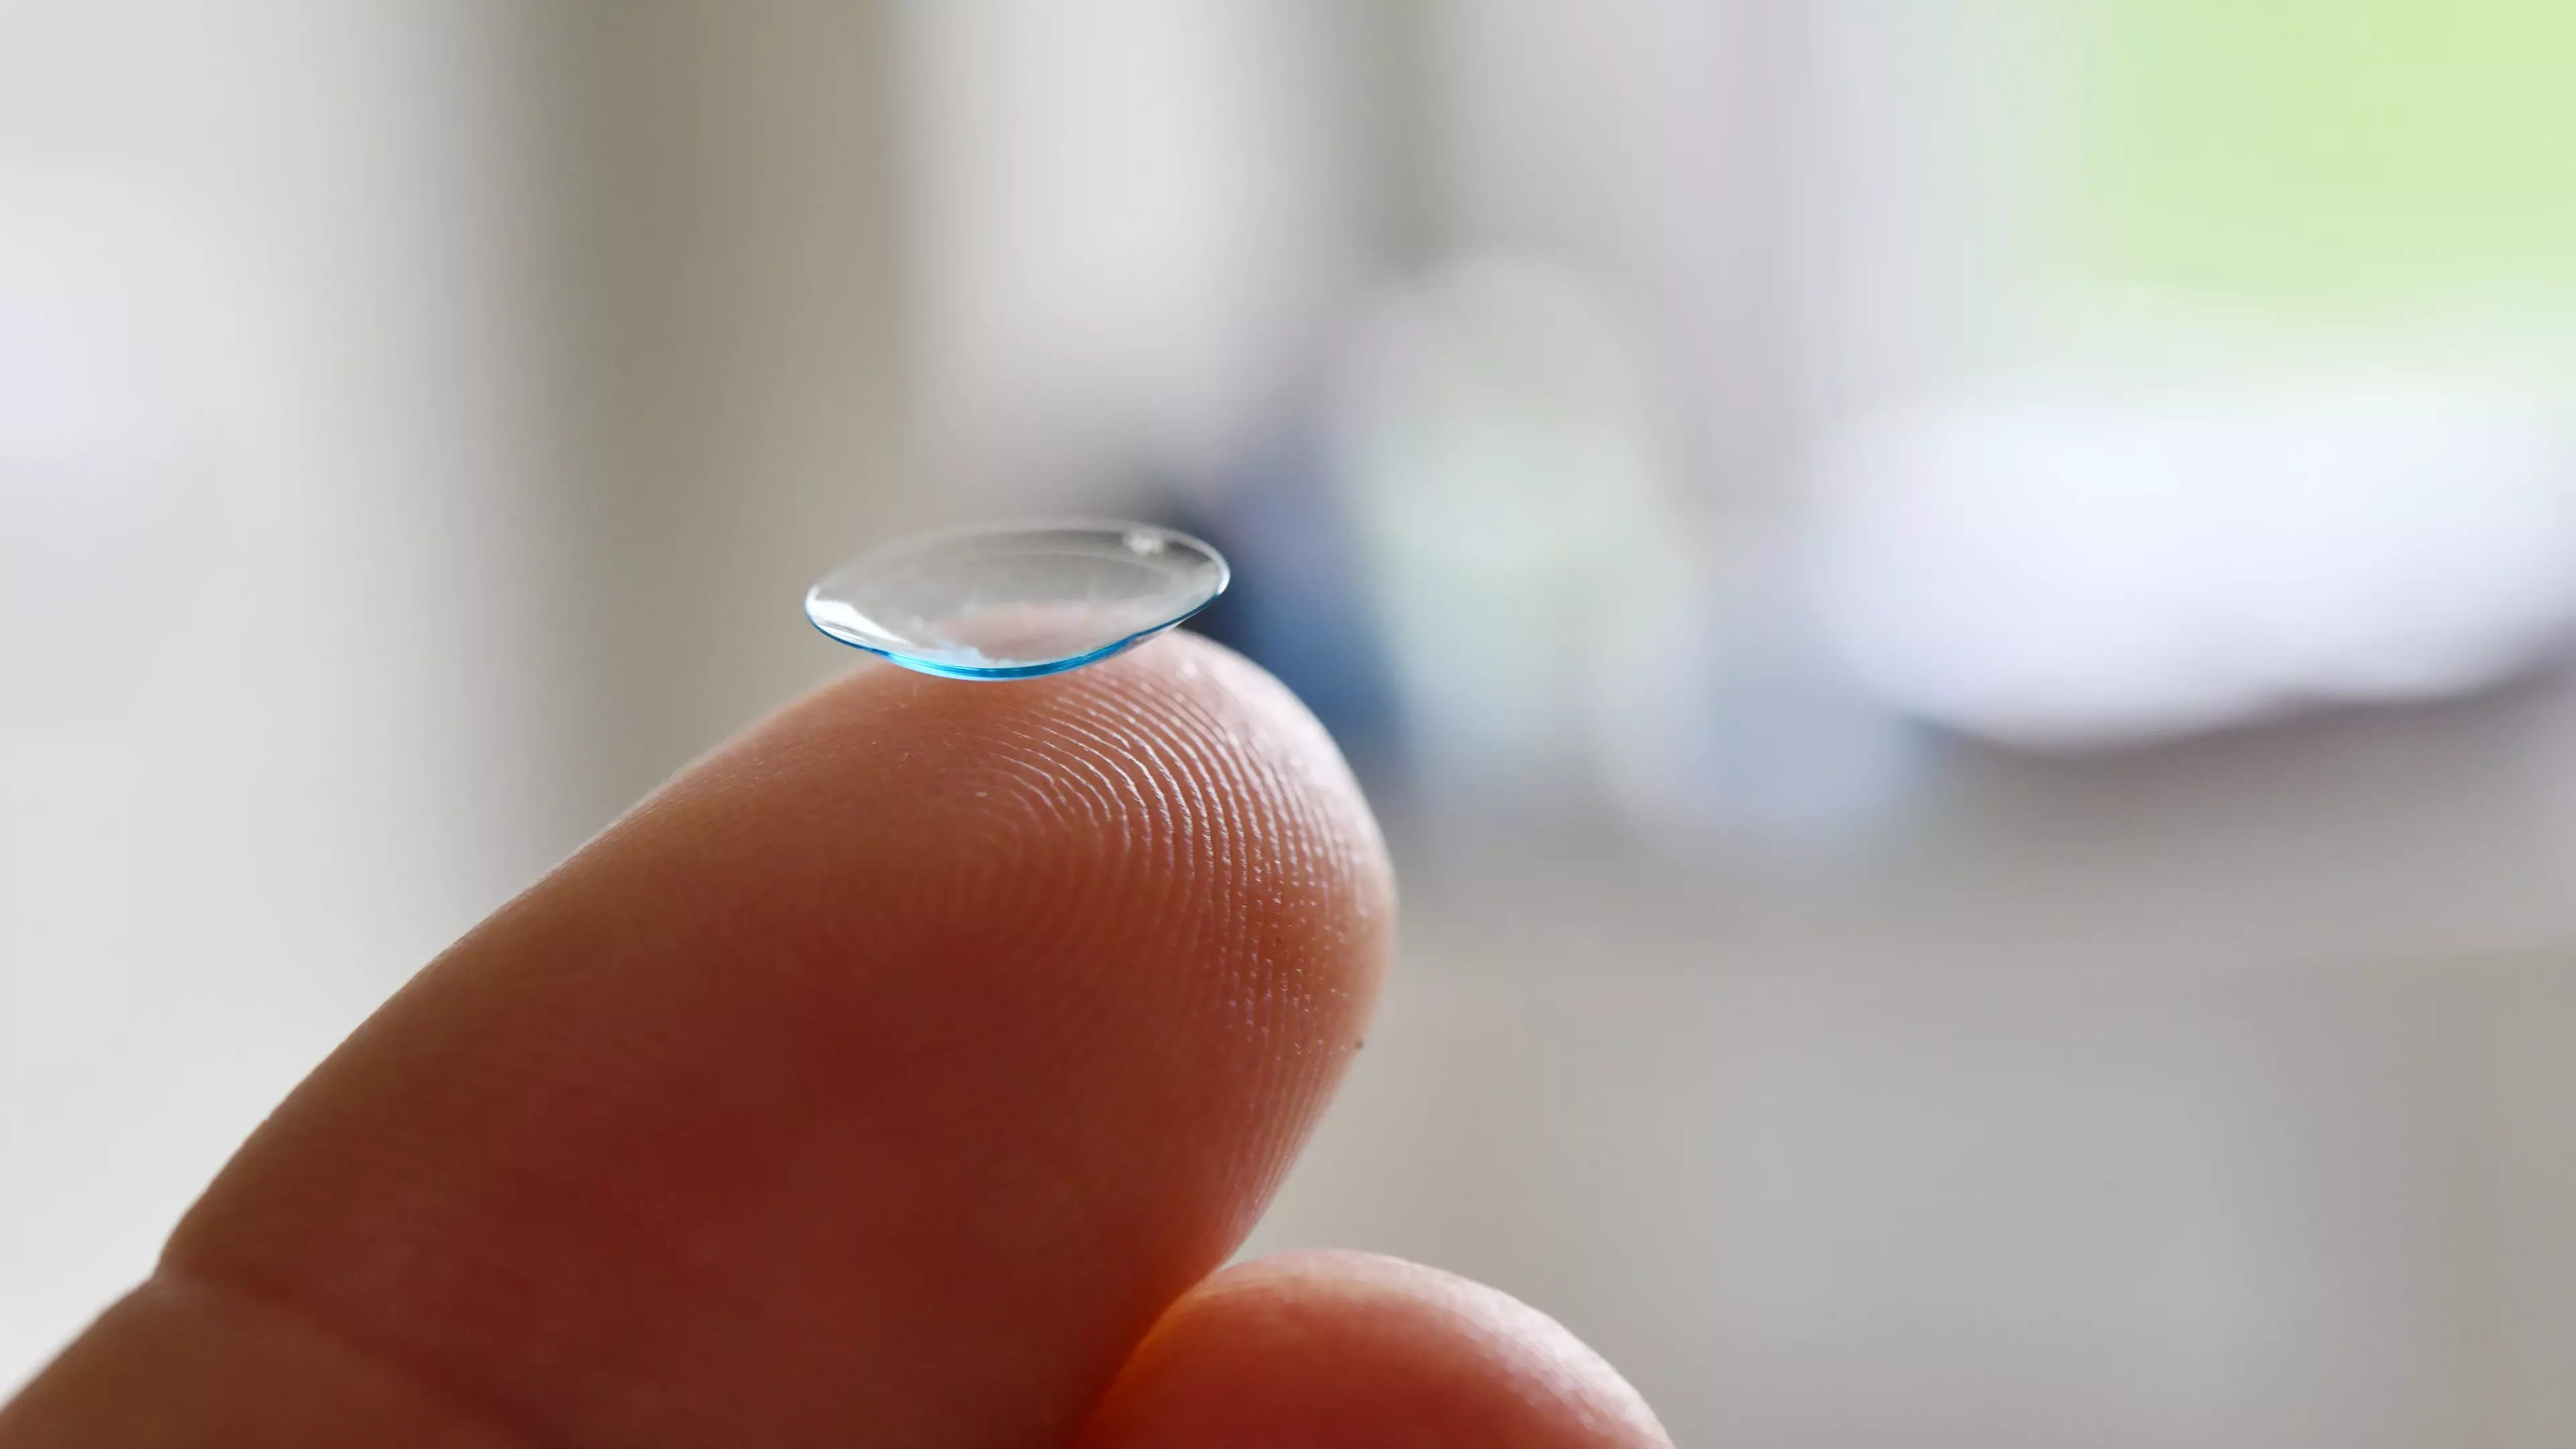 Doctor Shares Shocking Images To Warn Of Dangers Of Sleeping In Contact Lenses 